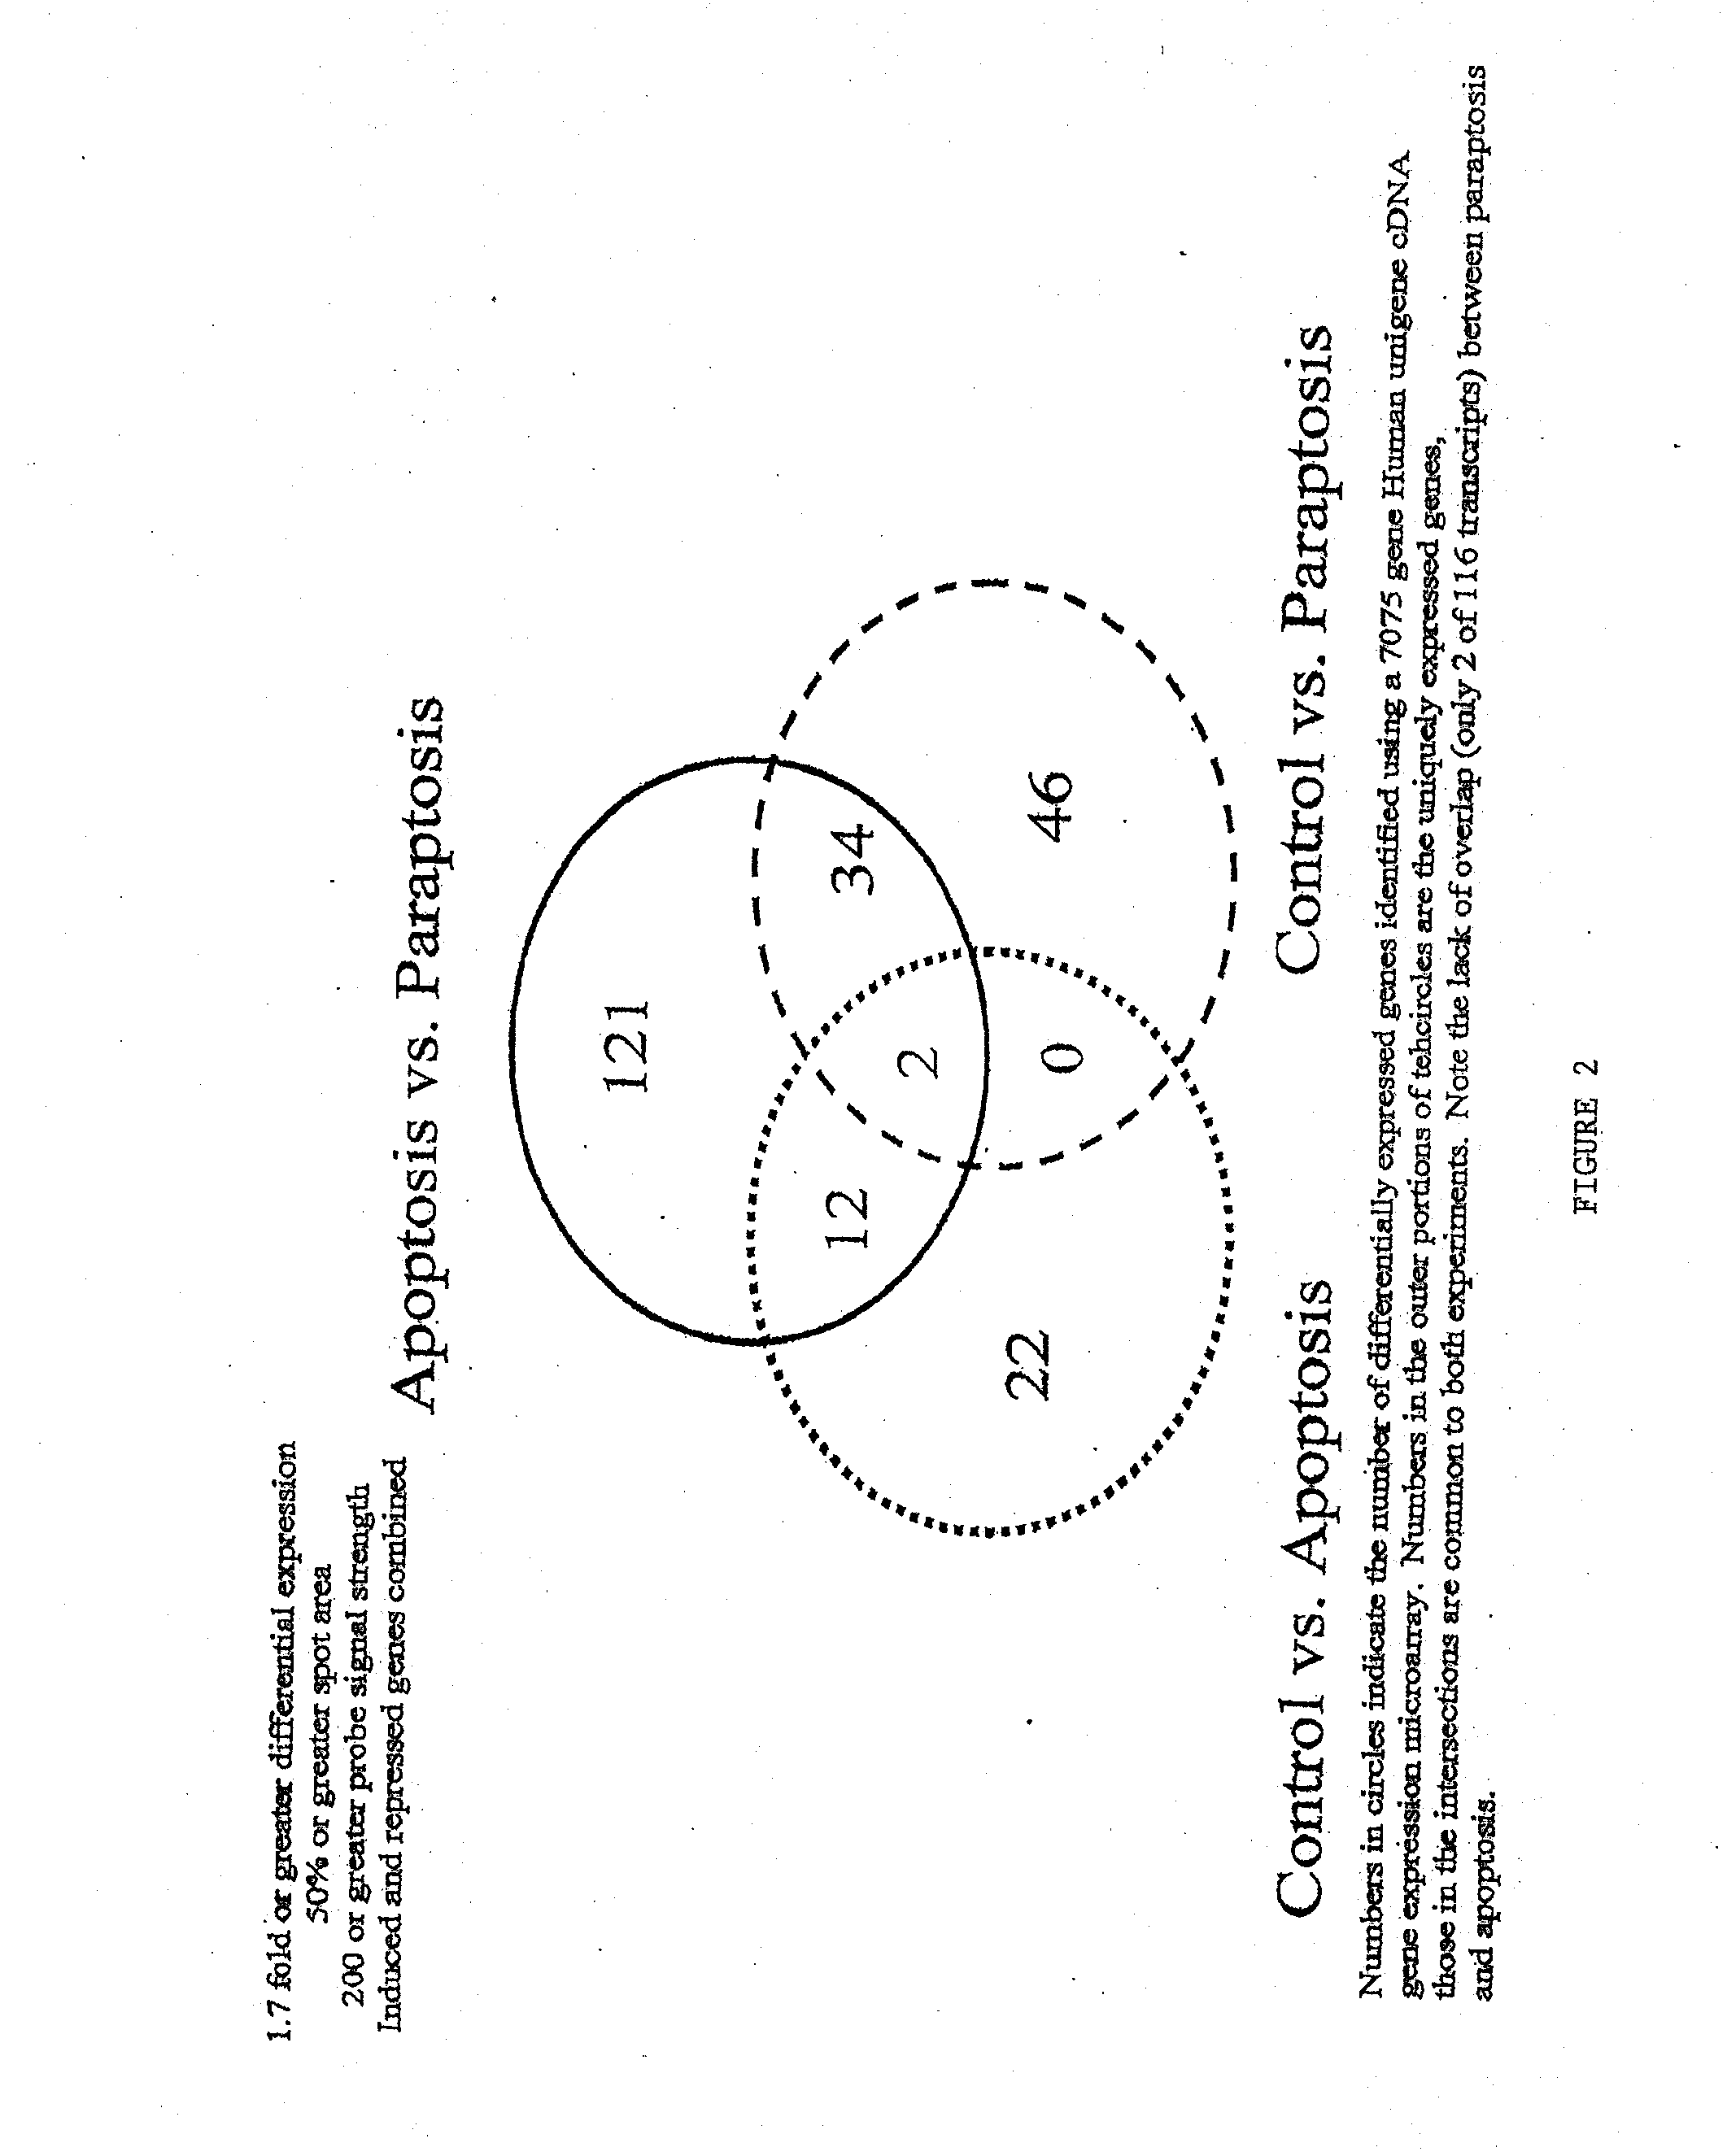 Modulators of paraptosis and related methods